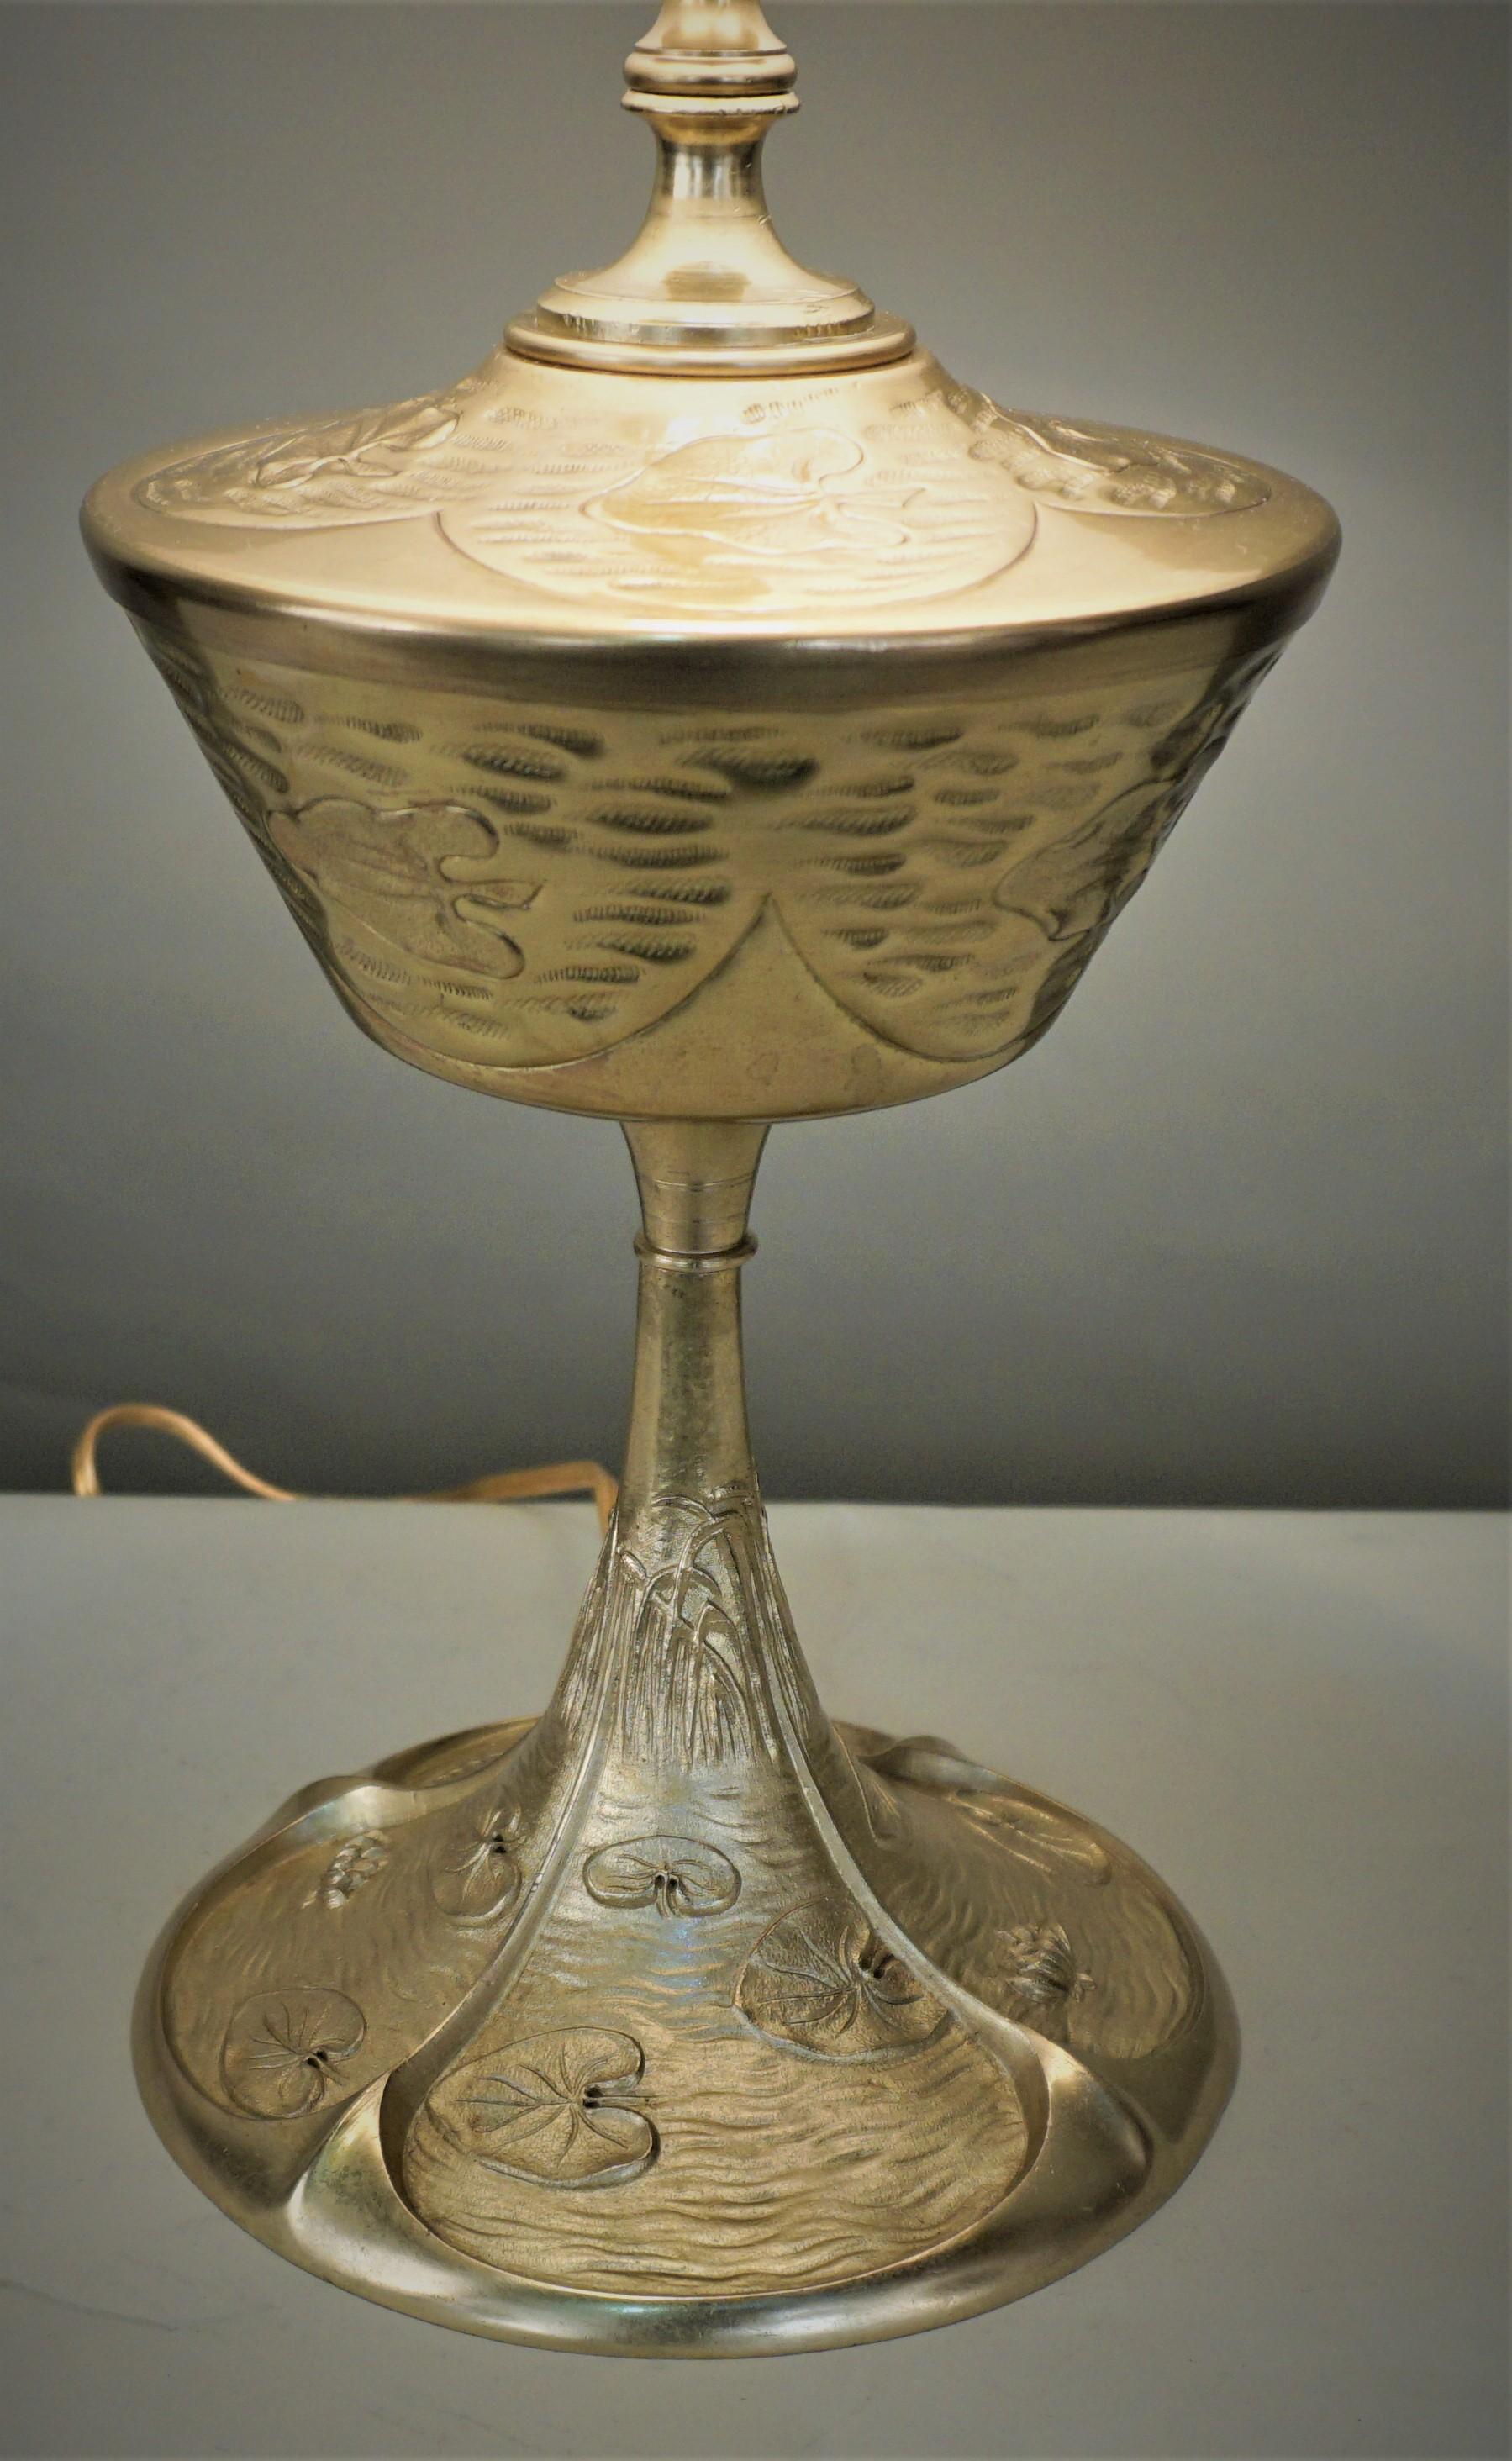 Late 19th century oil lamp base that has been electrified and fitted with silk lampshade.